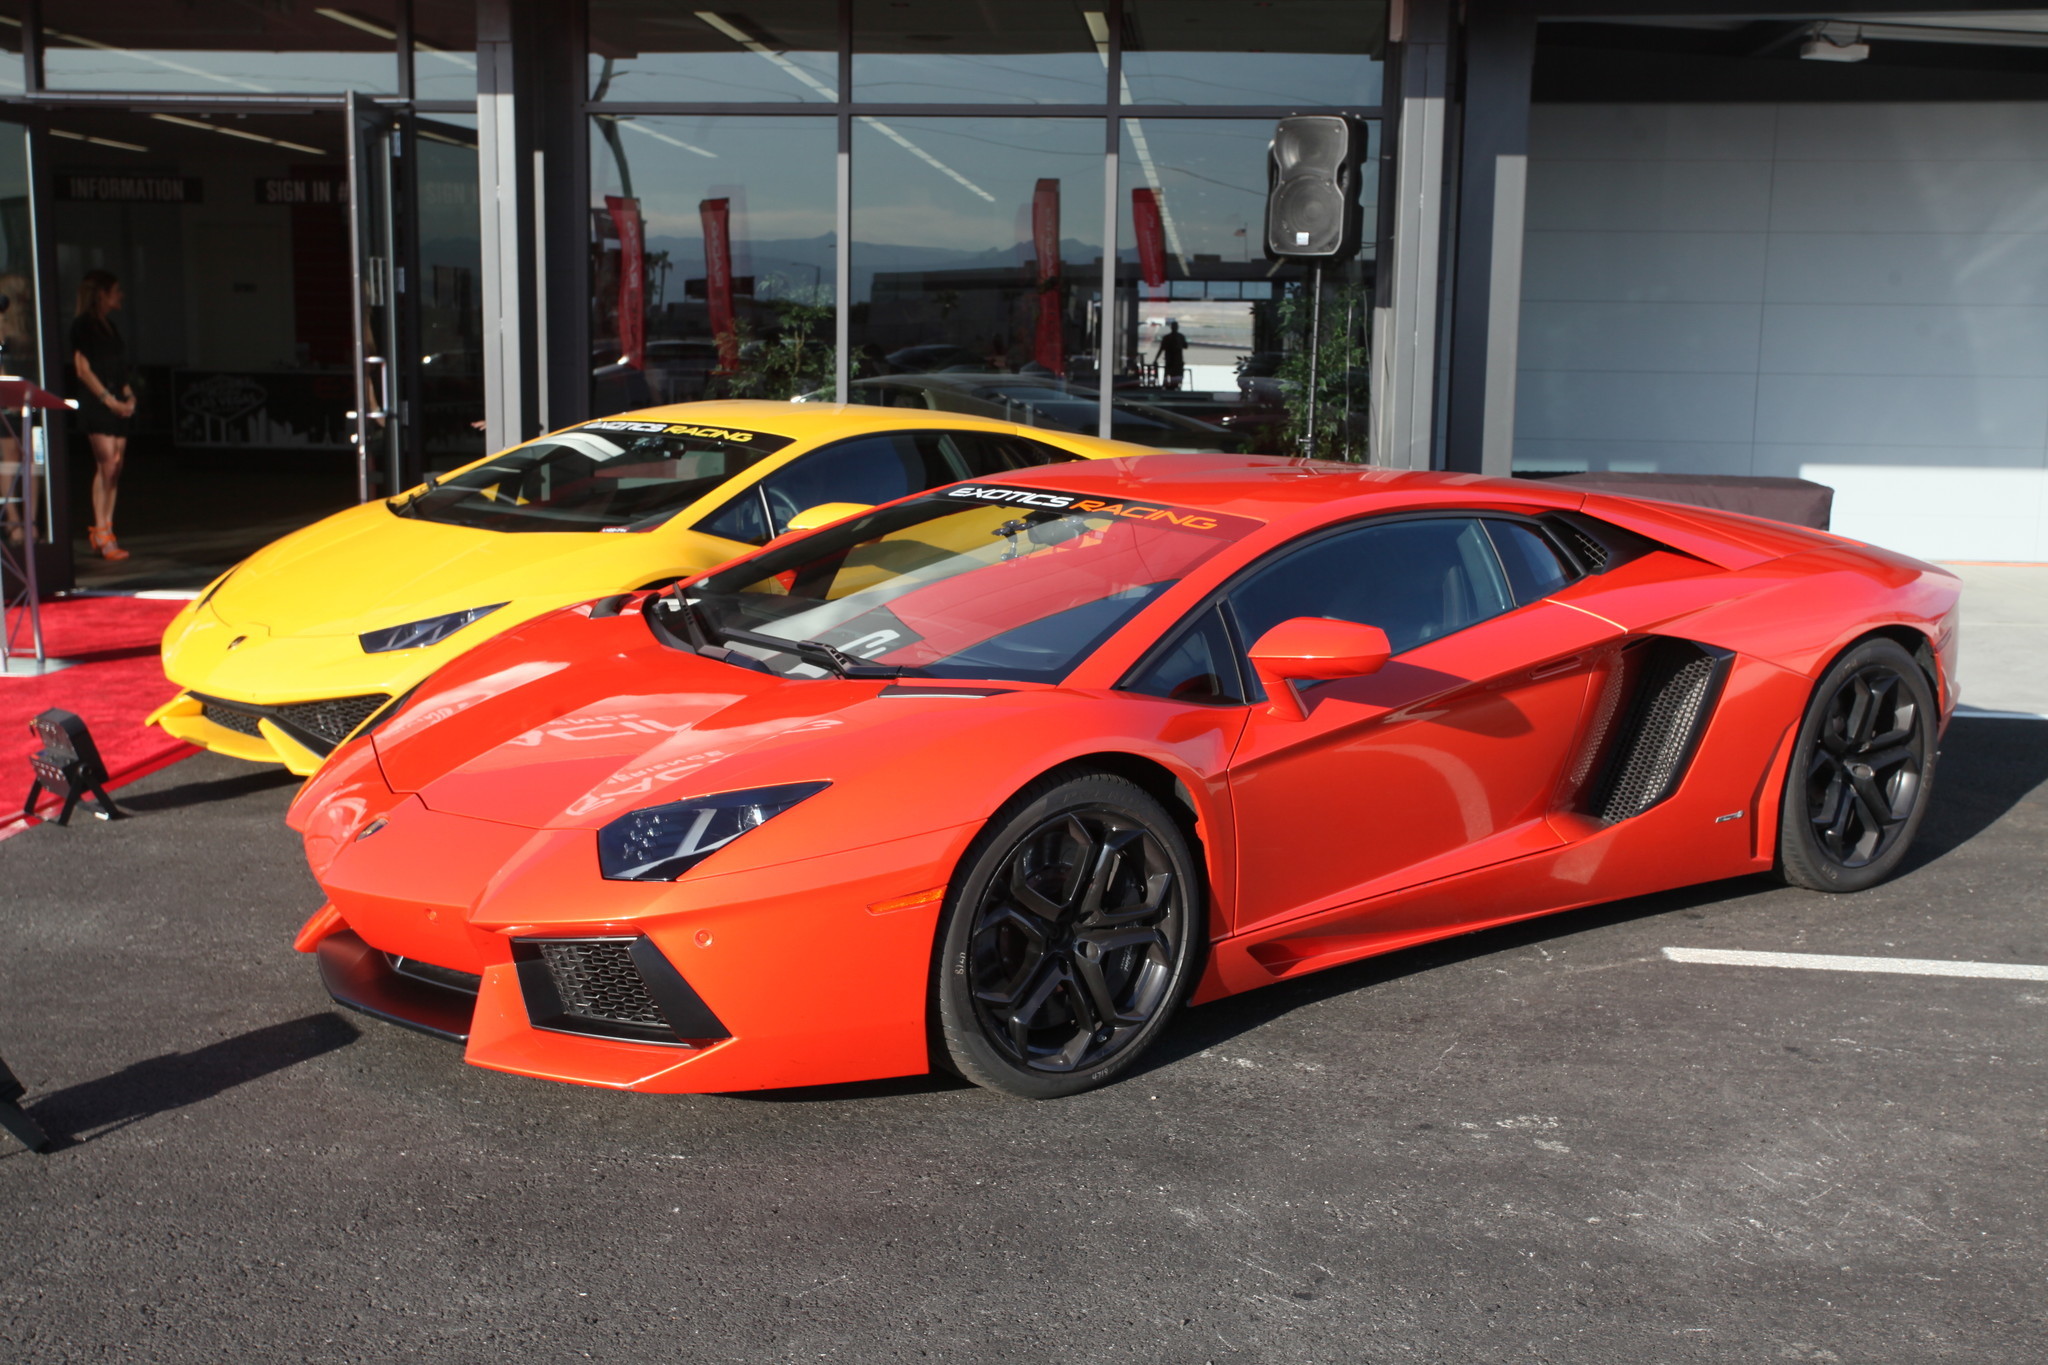 We make the dream of racing these ultra exclusive cars possible for everyone.